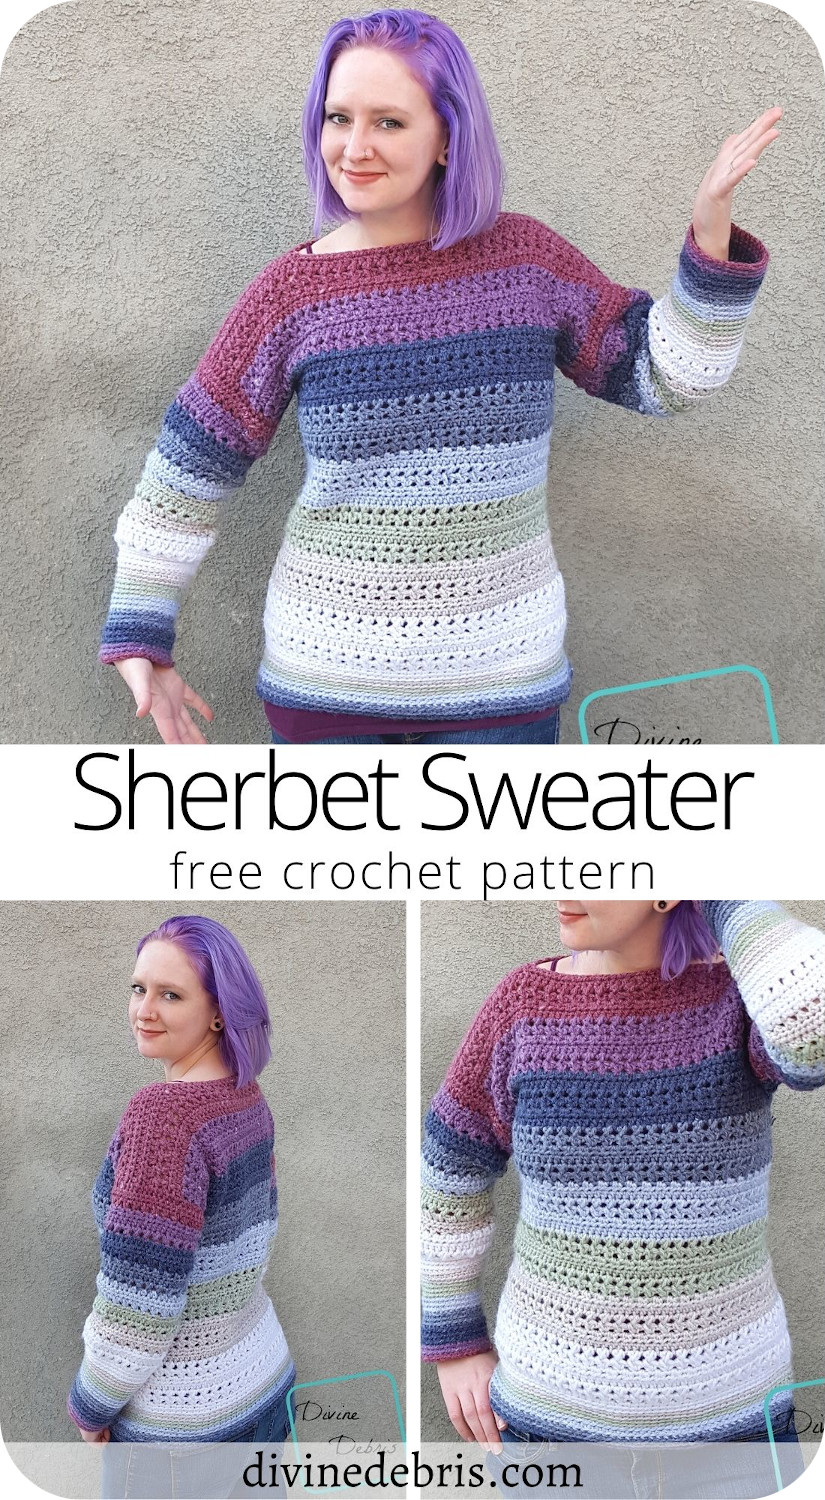 Learn to make a fun and easily customizable sweater, the Sherbet Sweater from a free crochet pattern available on DivineDebris.com